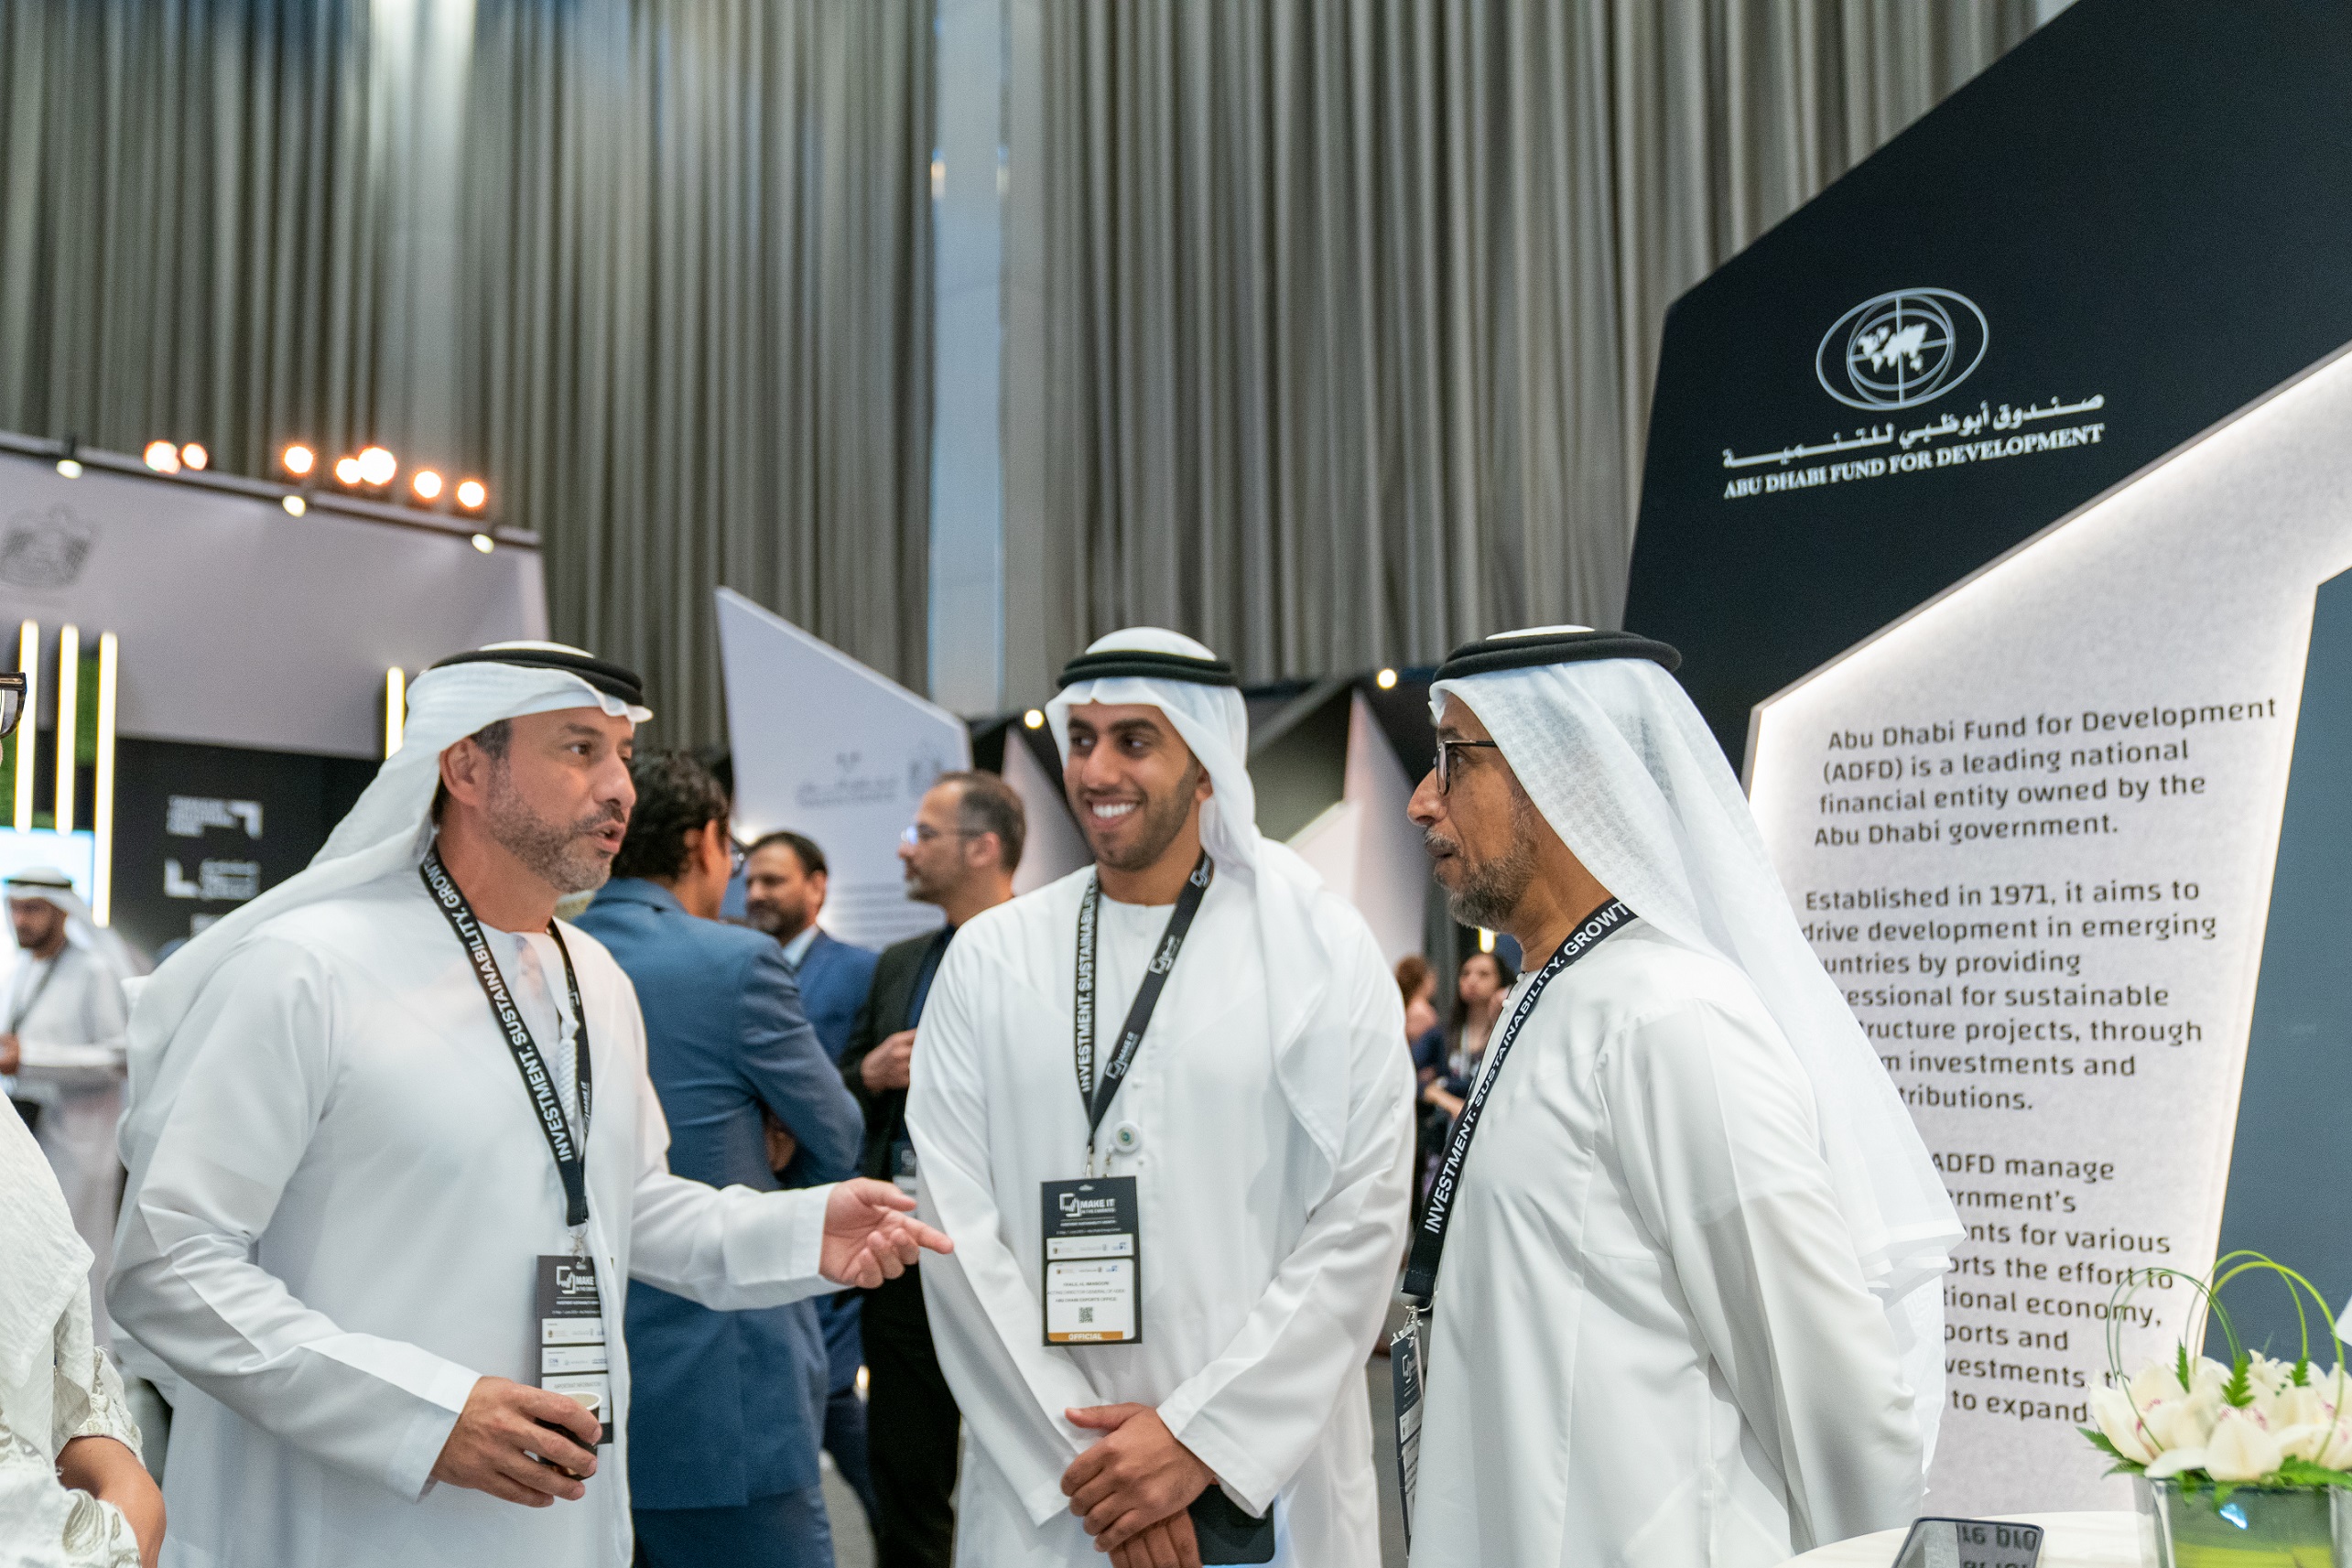 Abu Dhabi Fund For Development Extends Strategic Support To ‘Make It In the Emirates’ Forum